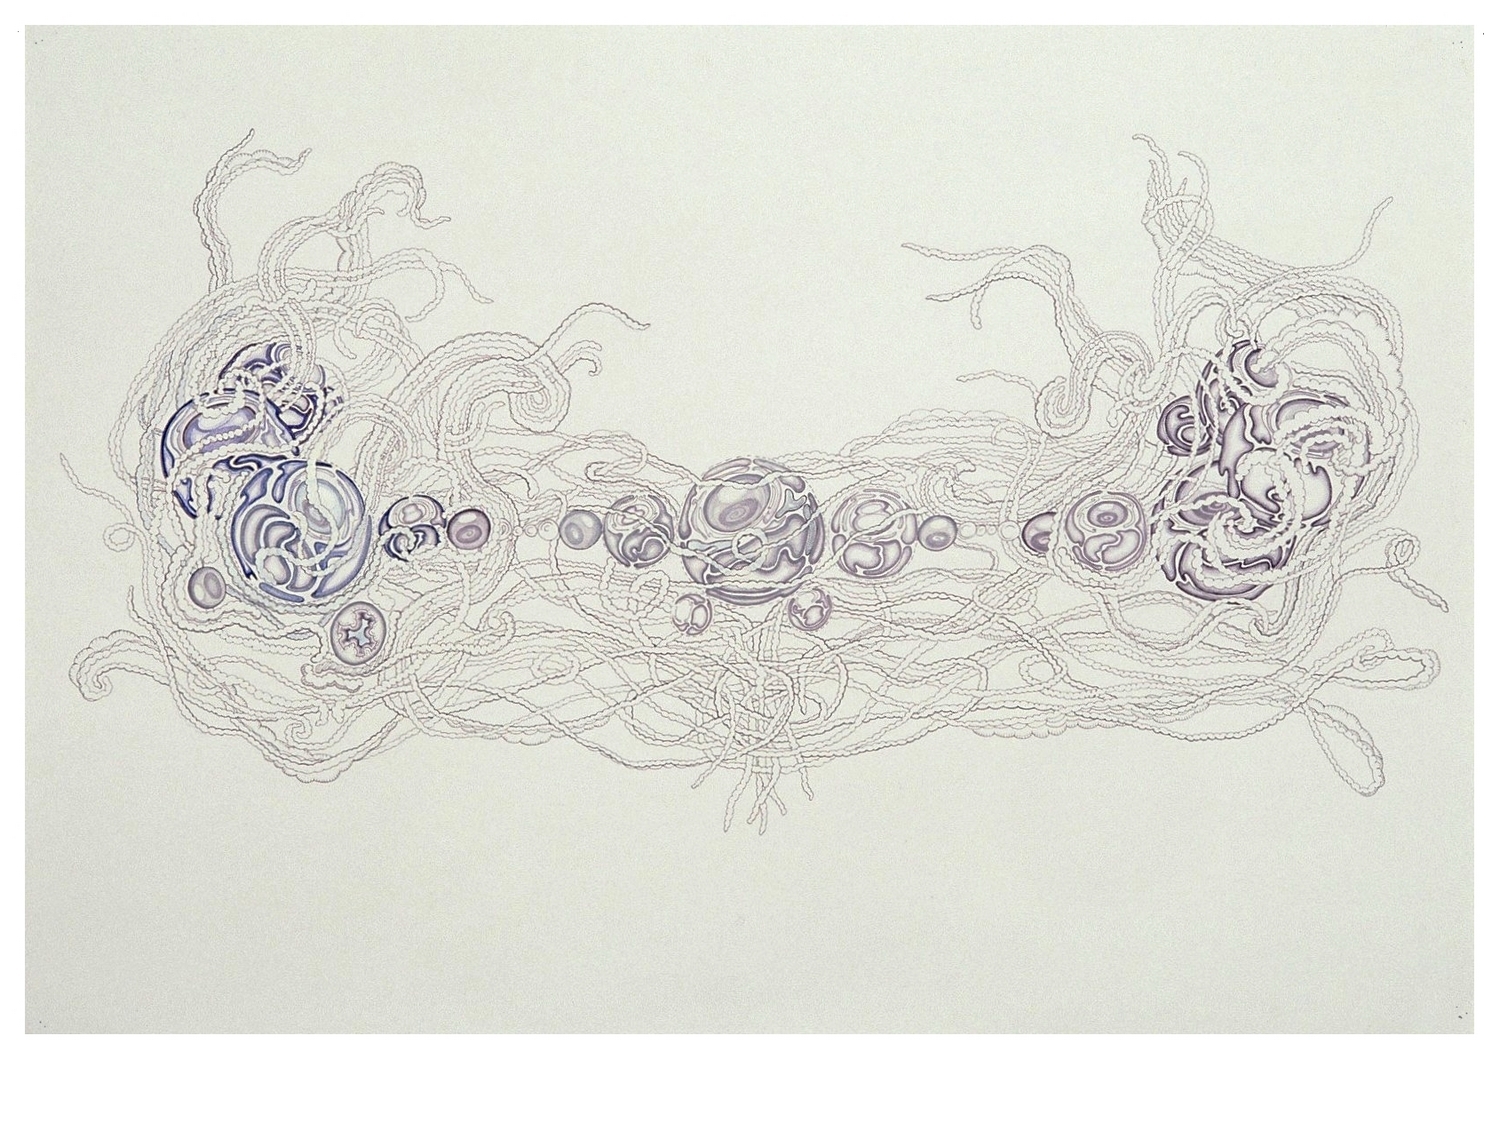 No title, 2002, mixed media on paper, 70 x 100 cm